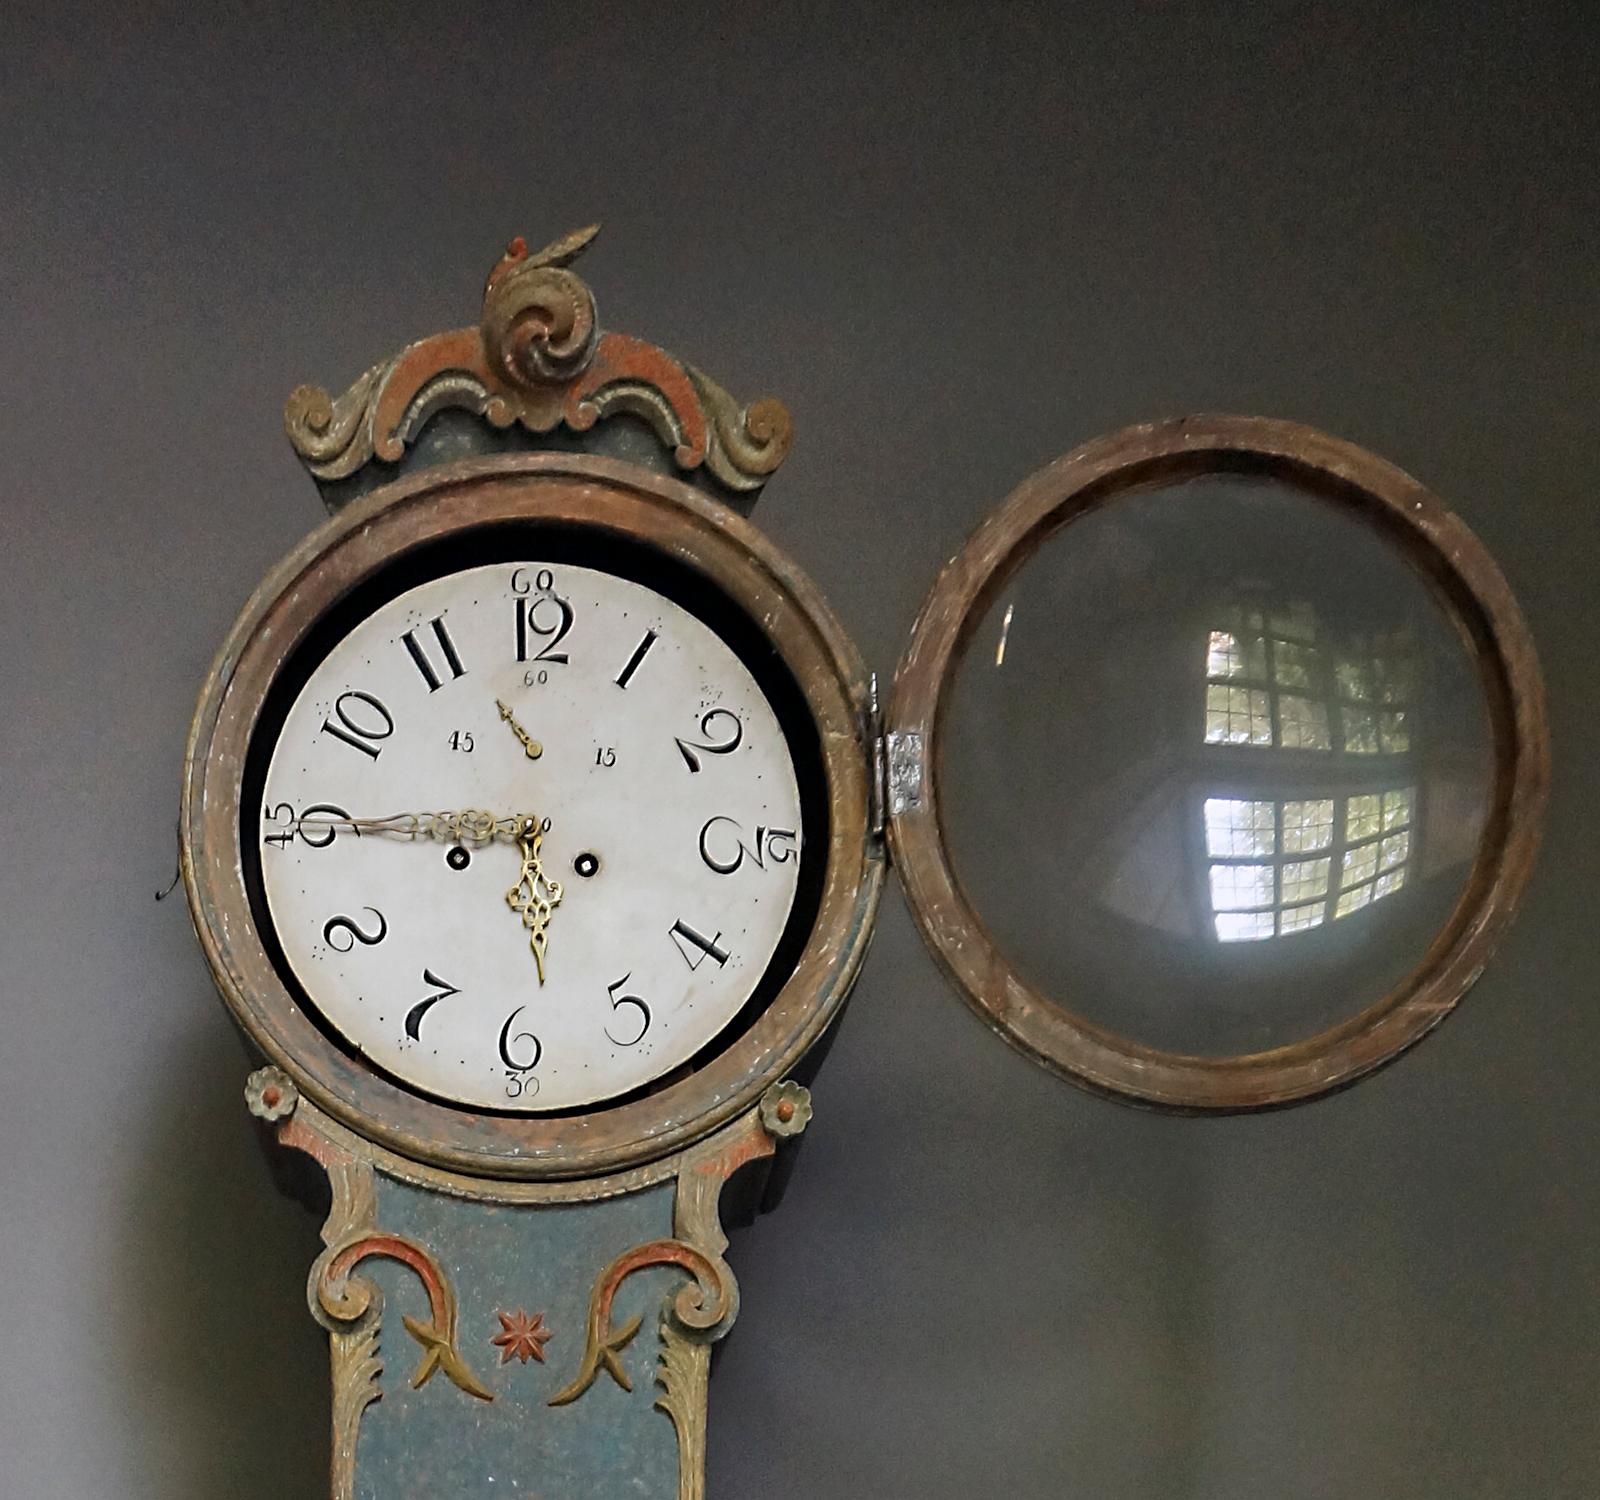 Beautifully detailed Mora clock, Sweden dated 1803, with original clockworks with separate second hand and unusually large dial. The case retains its original three-color painted surface and convex glass in the bonnet and the belly. It is quite